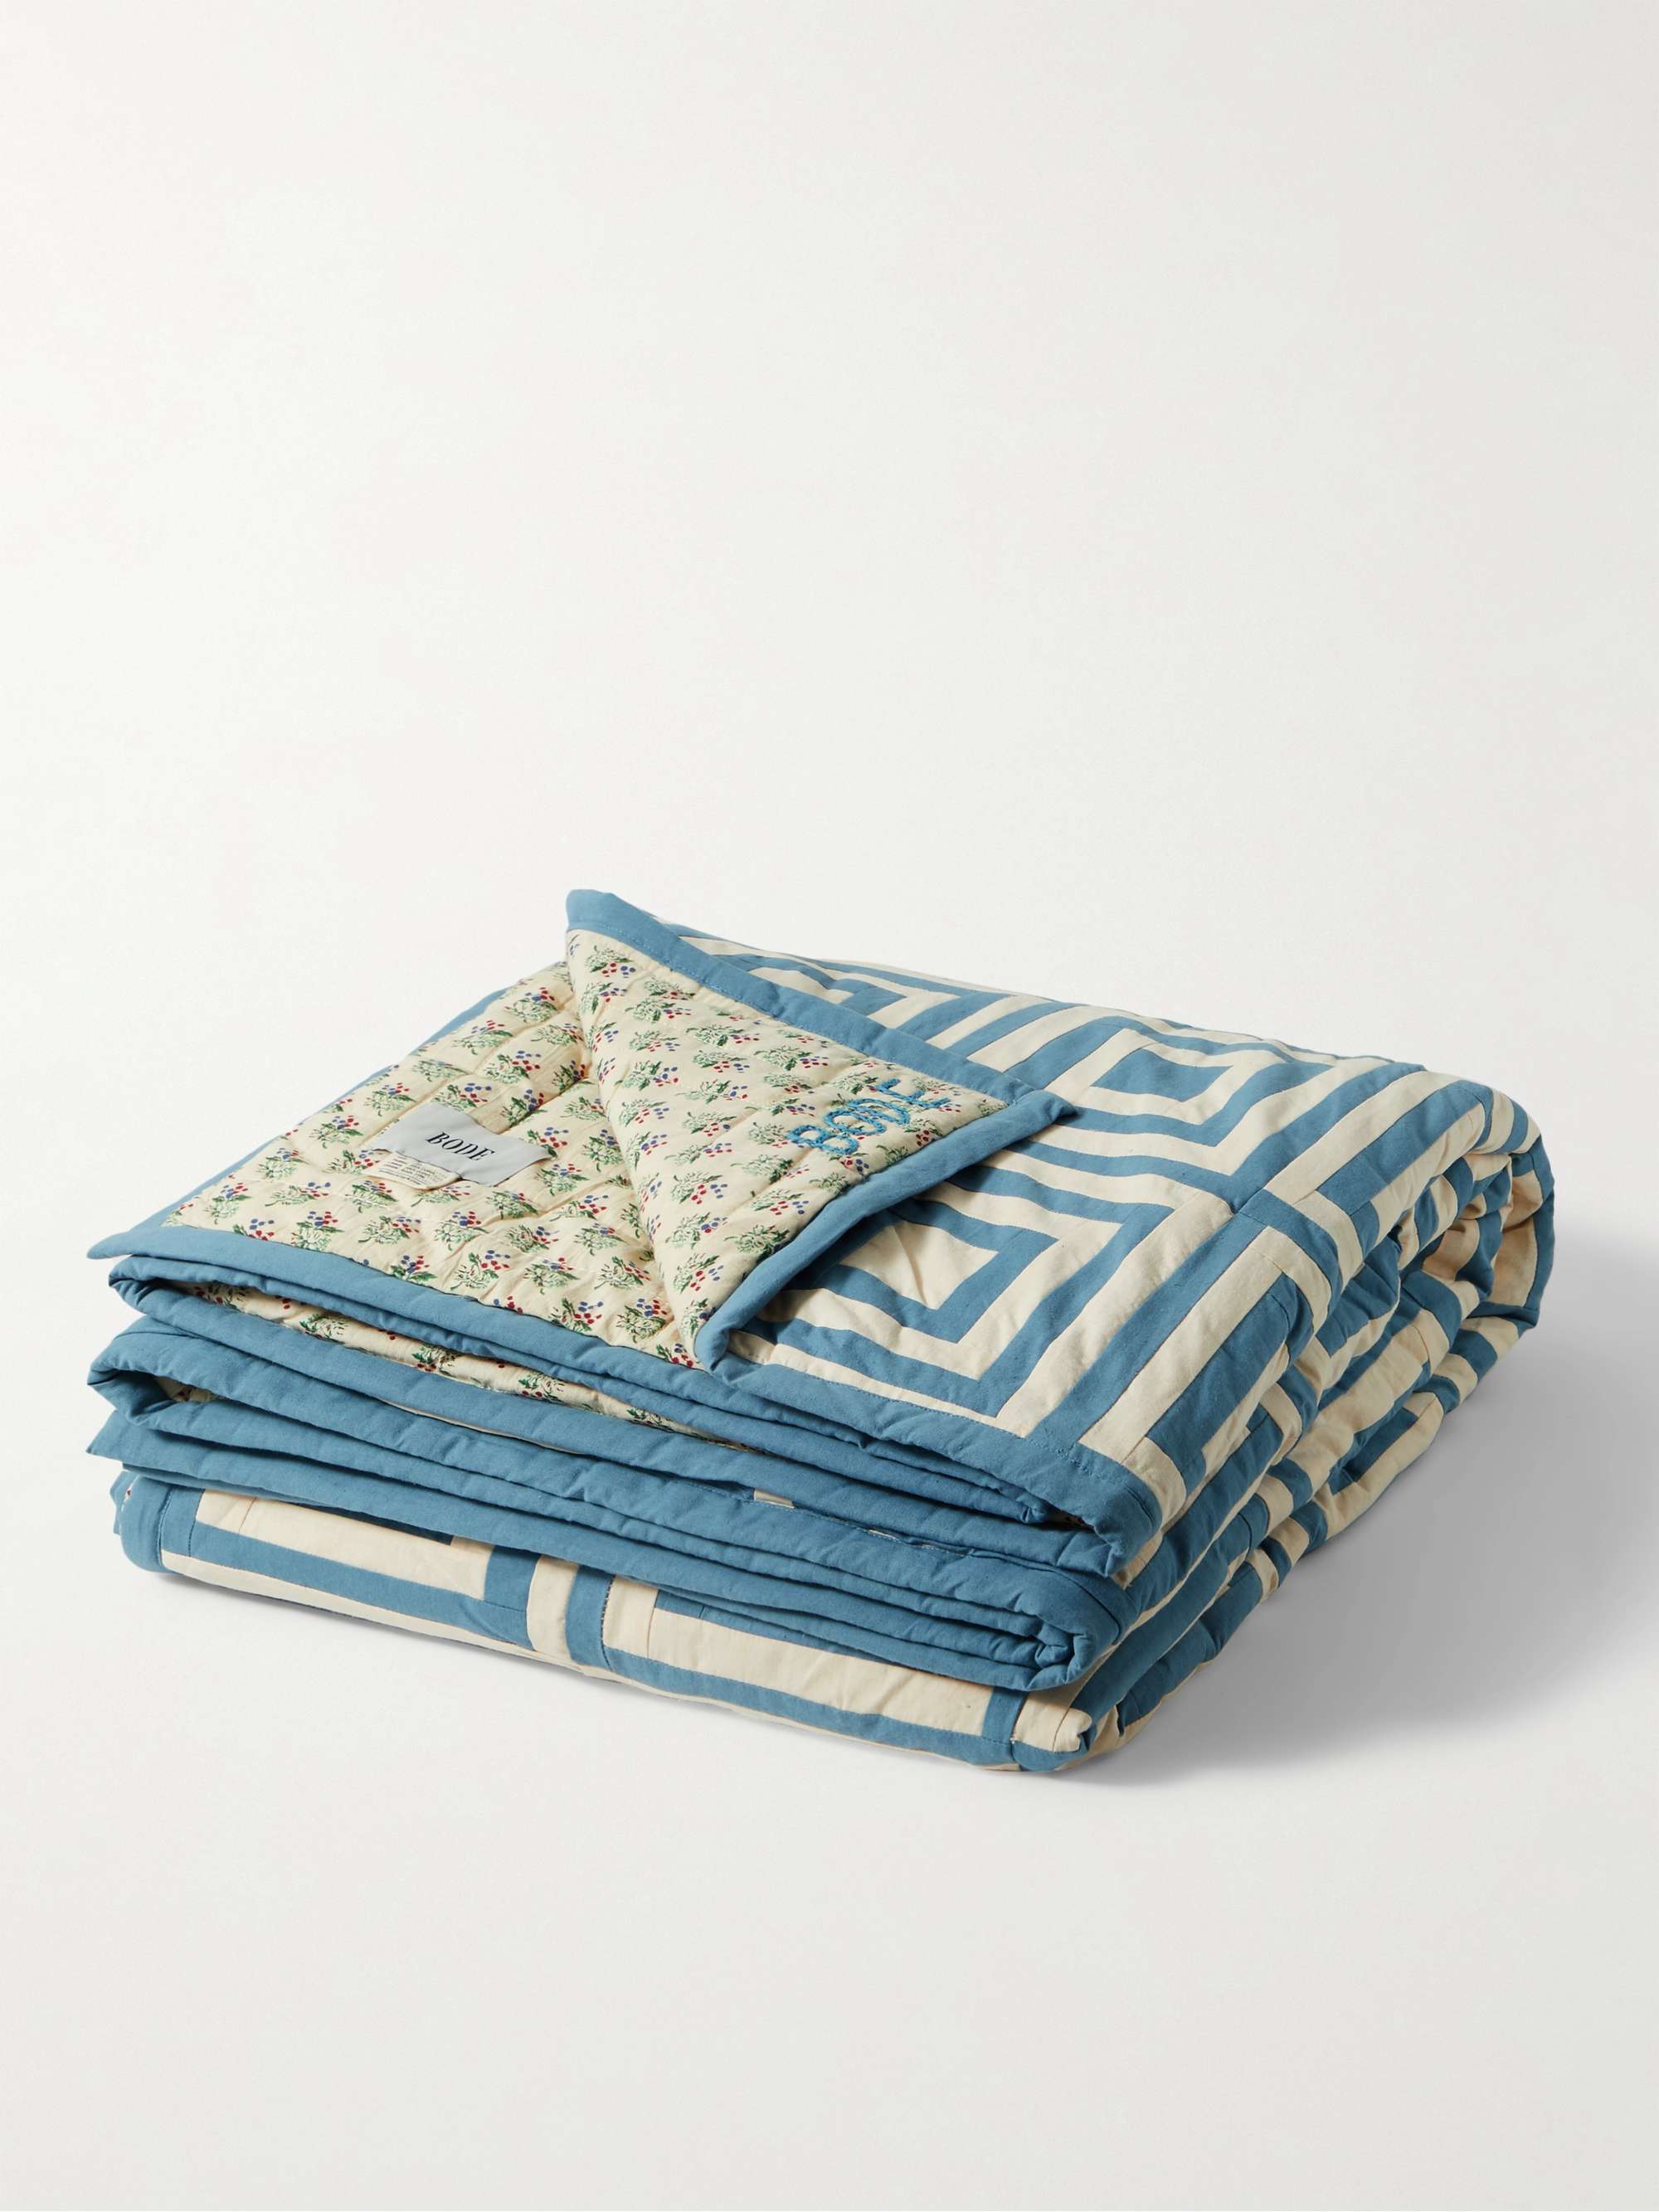 BODE White House Steps Quilted Cotton Blanket